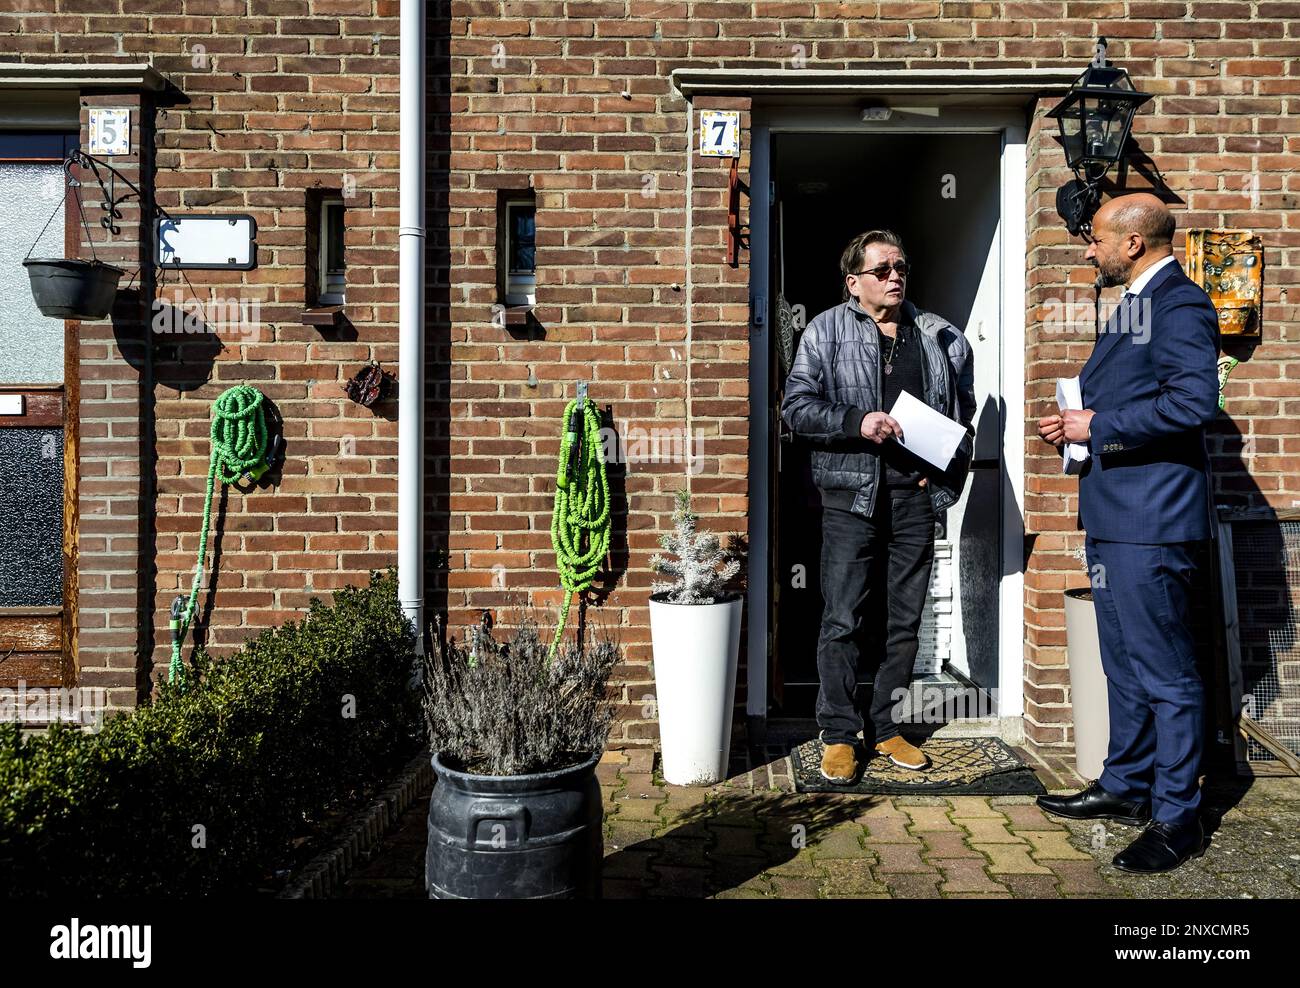 ARNHEM - Mayor Ahmed Marcouch during a voter turnout campaign for the Provincial Council elections on 15 March. ANP REMKO DE WAAL netherlands out - belgium out Stock Photo